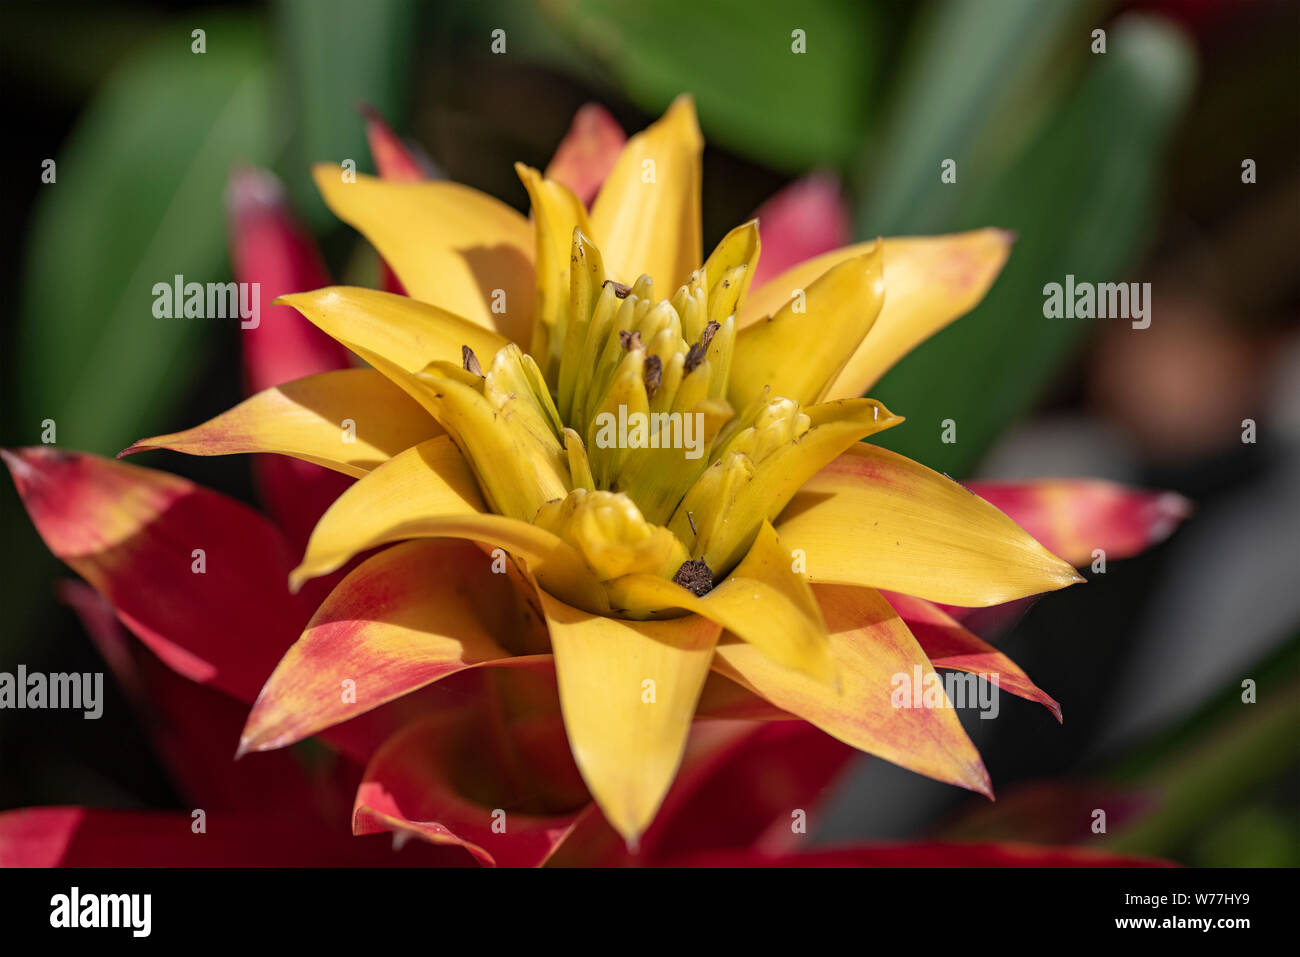 Guzmania - a flower close-up in natural light. Thailand. Stock Photo